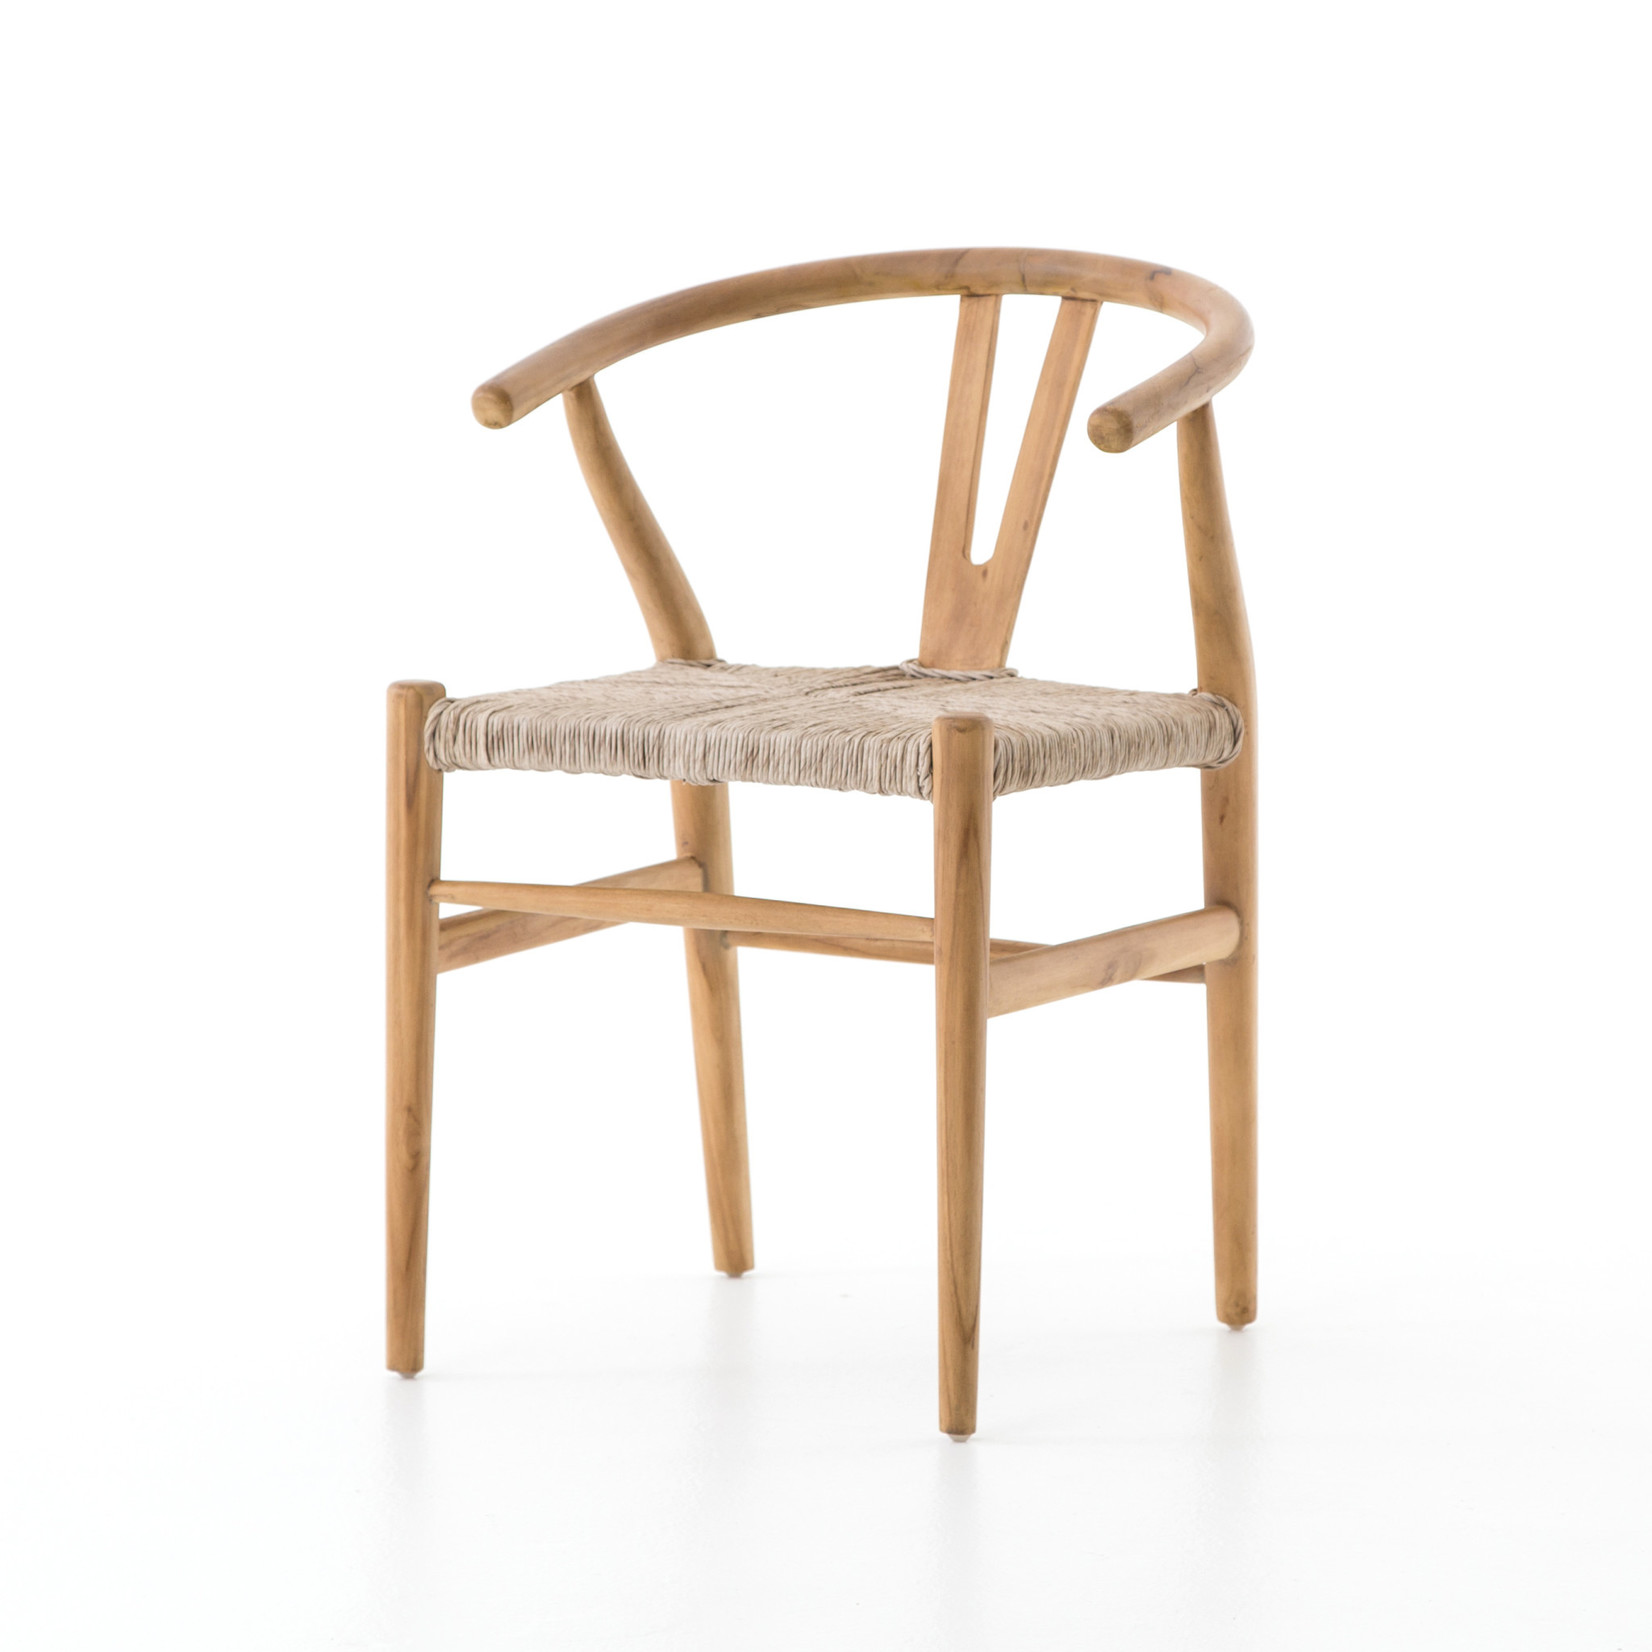 Muestra Dining Chair - Natural